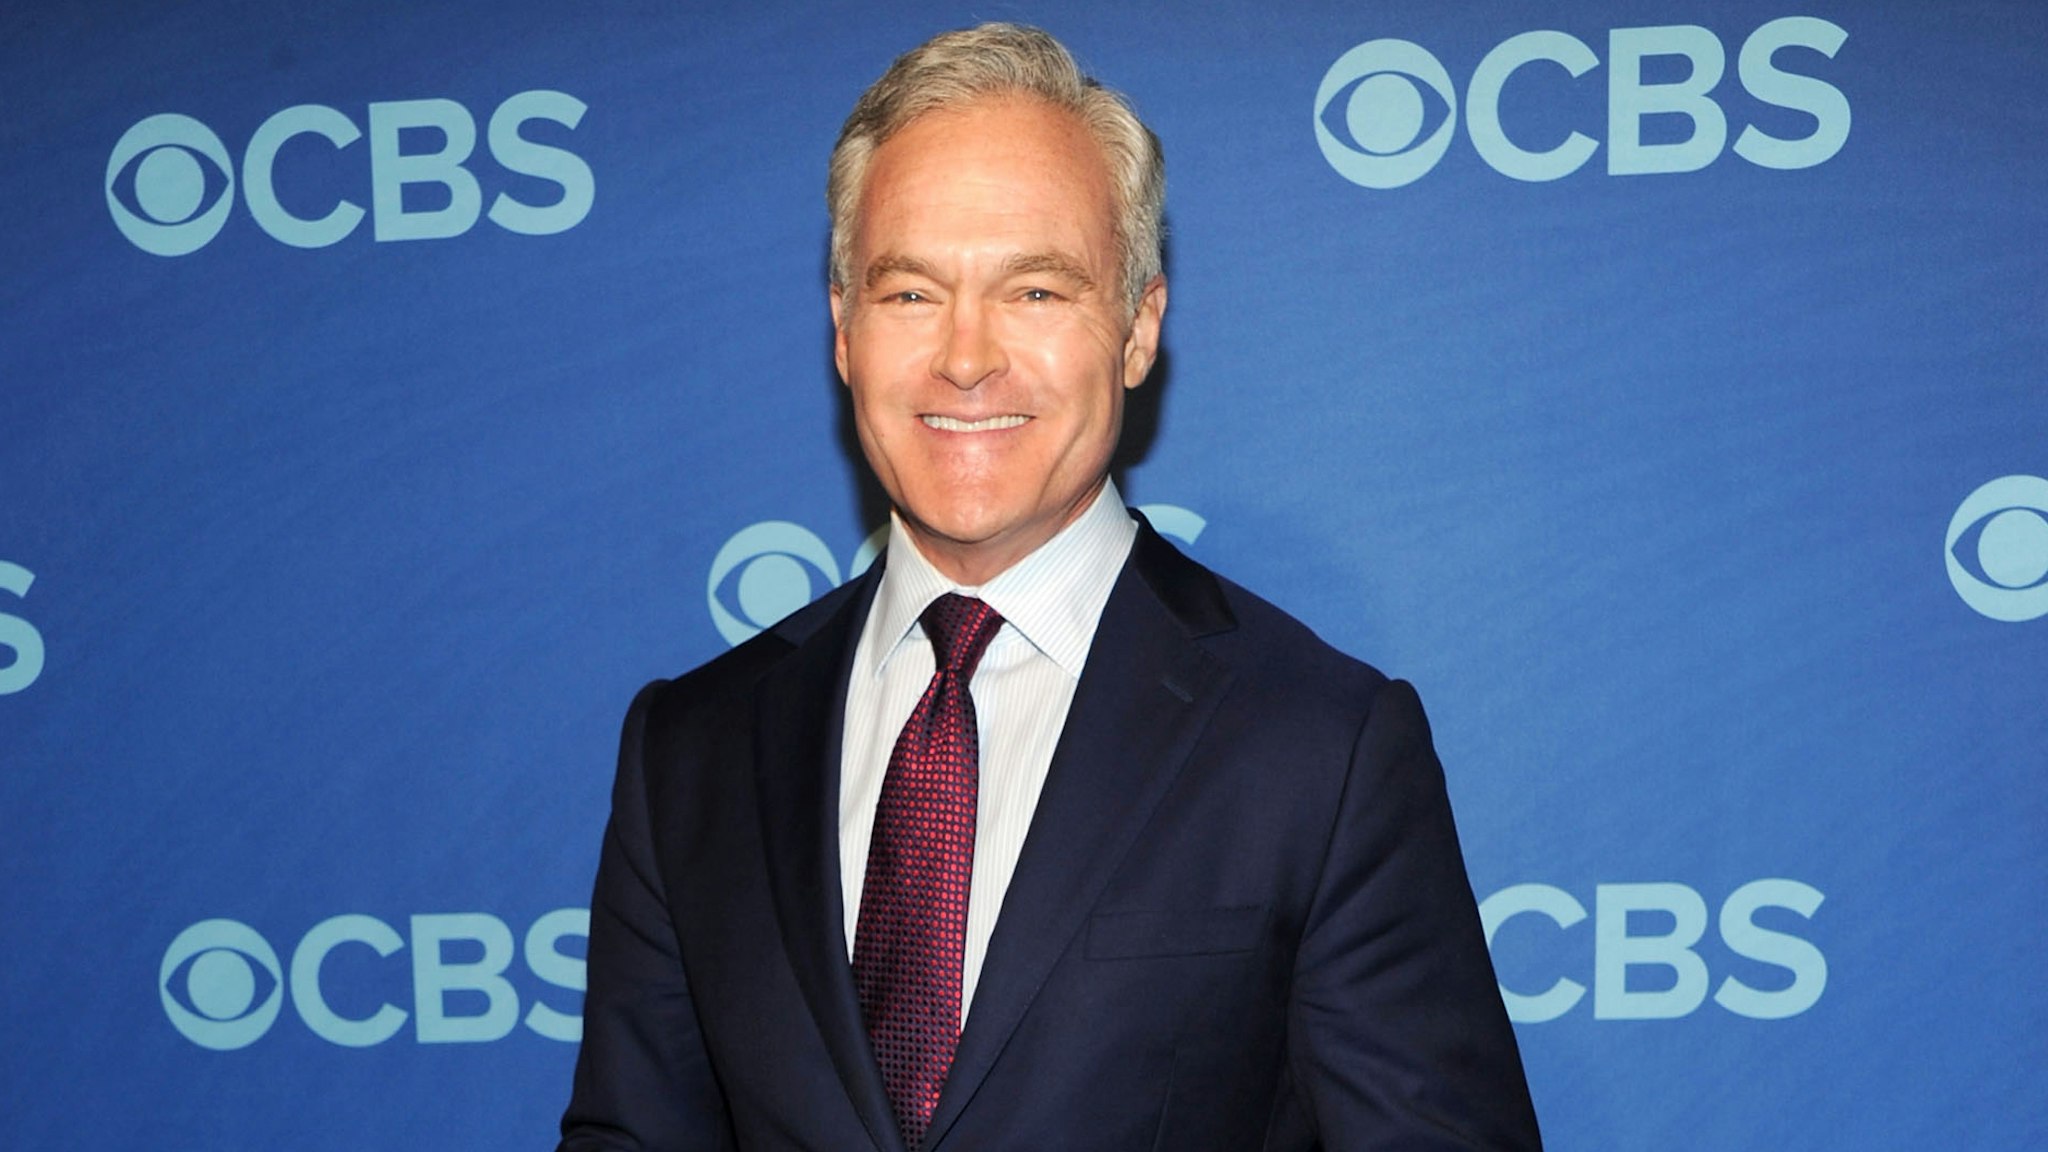 NEW YORK, NY - MAY 15: Scott Pelley attends CBS 2013 Upfront Presentation at The Tent at Lincoln Center on May 15, 2013 in New York City.